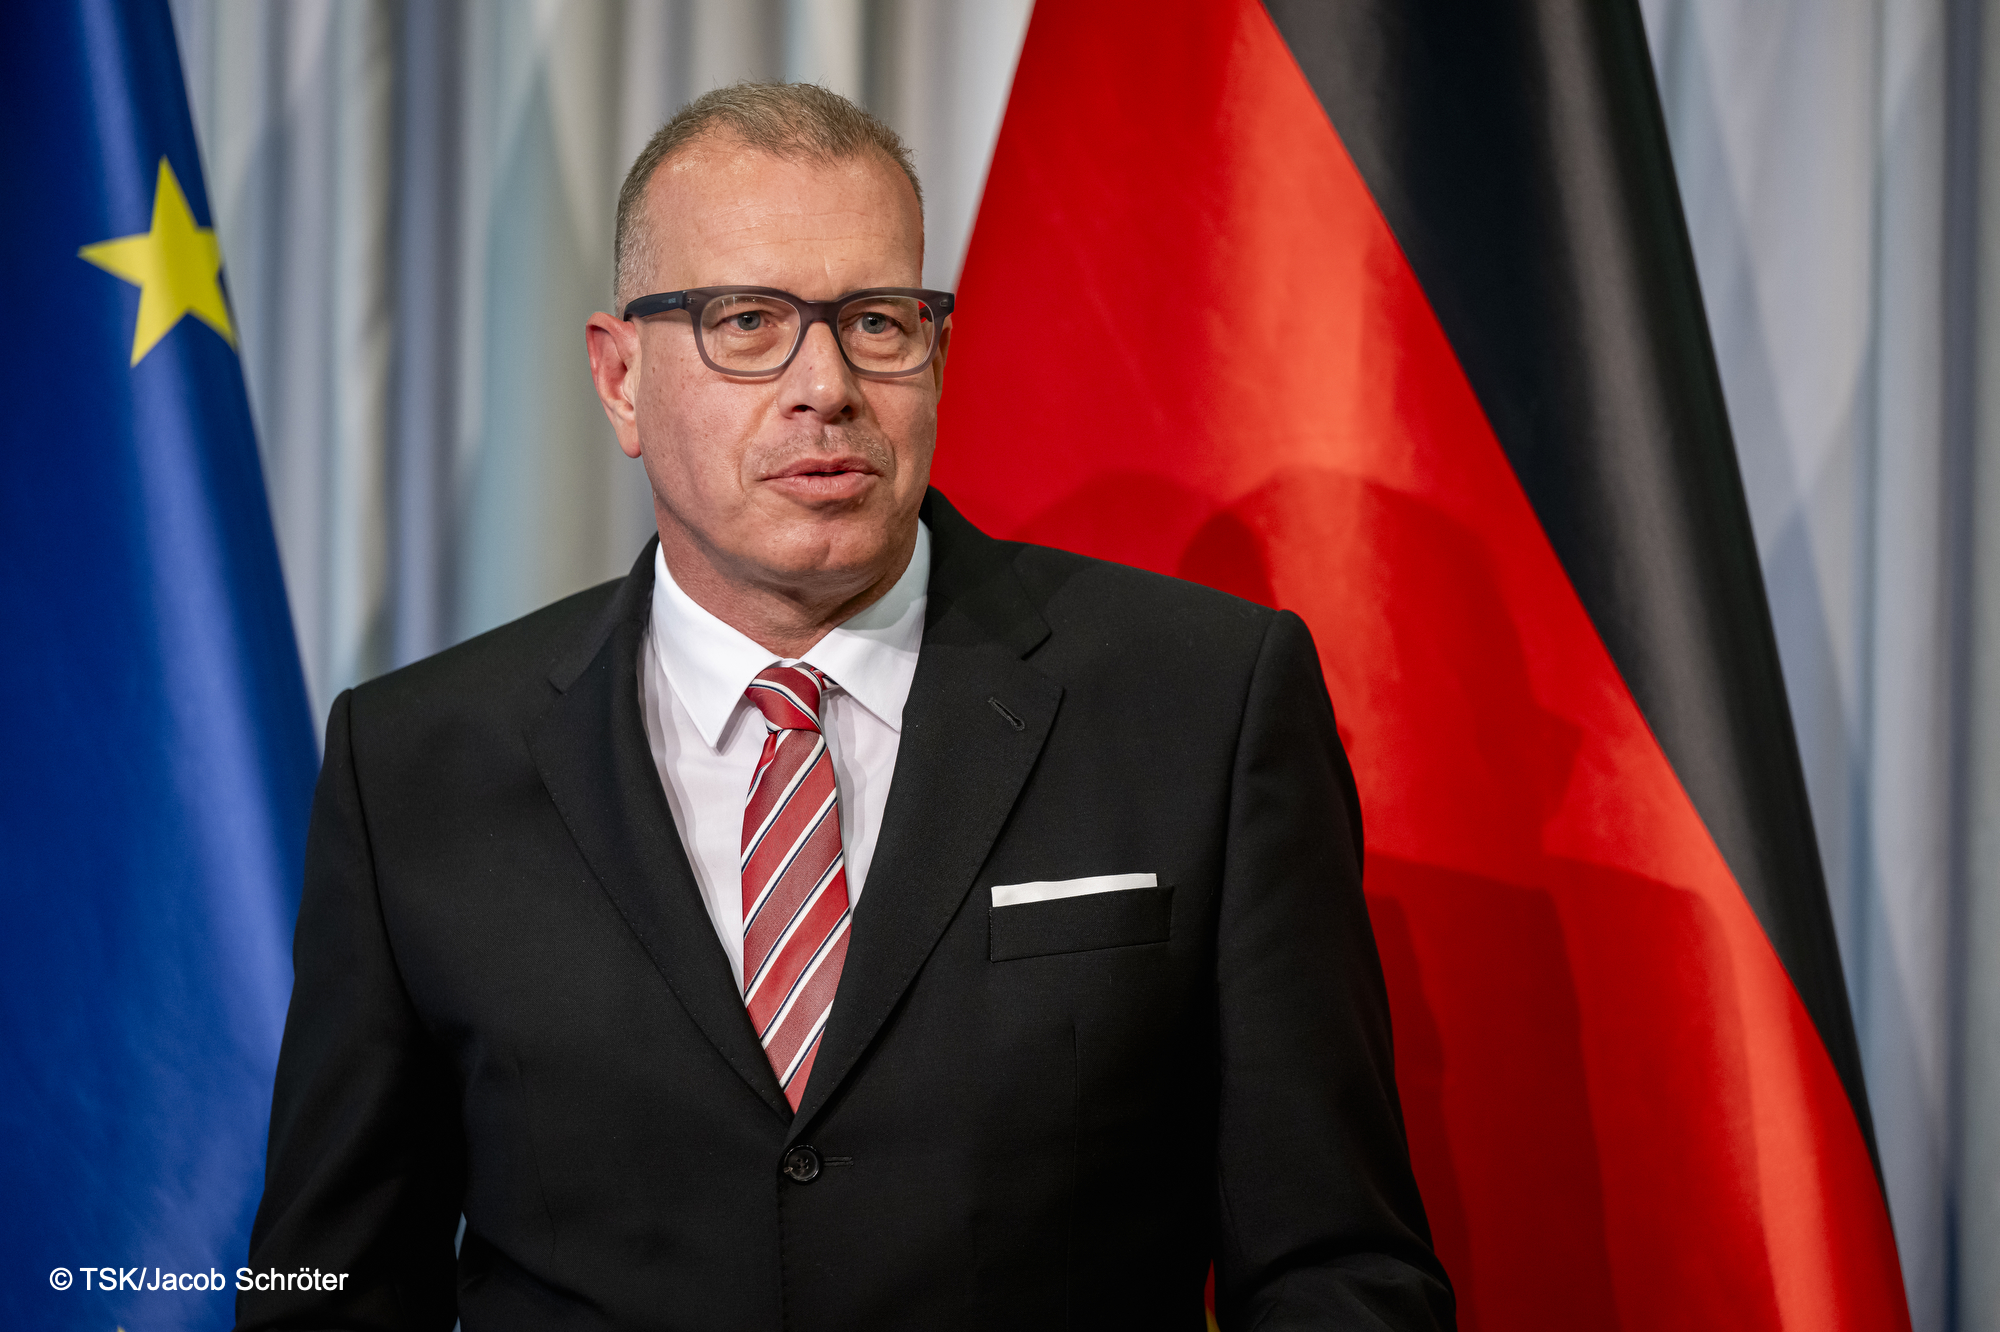 Photo of Andreas Tünnermann in front of the German and EU flags.